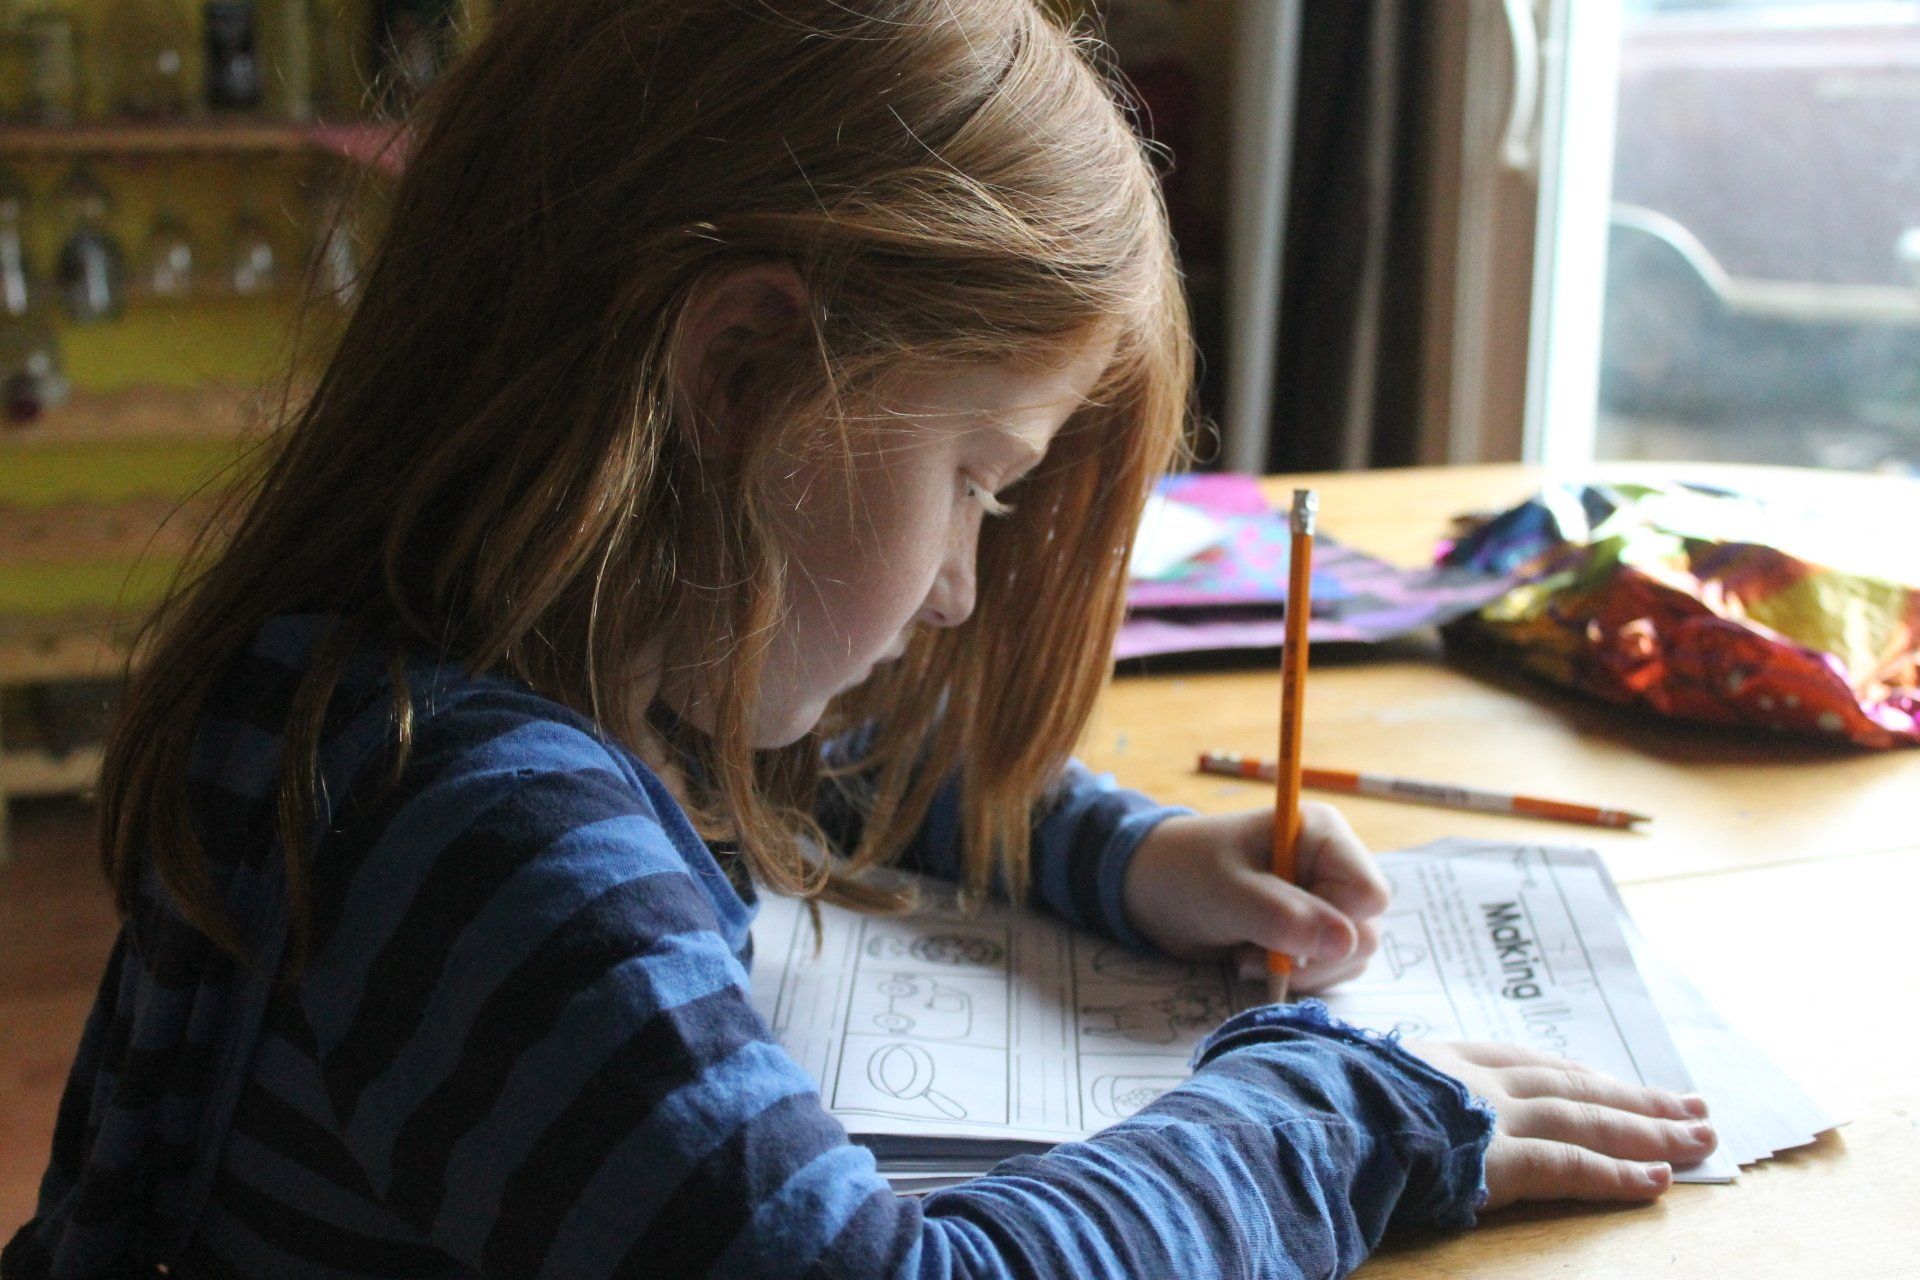 A young girl is sitting at a table writing on a piece of paper with a pencil.